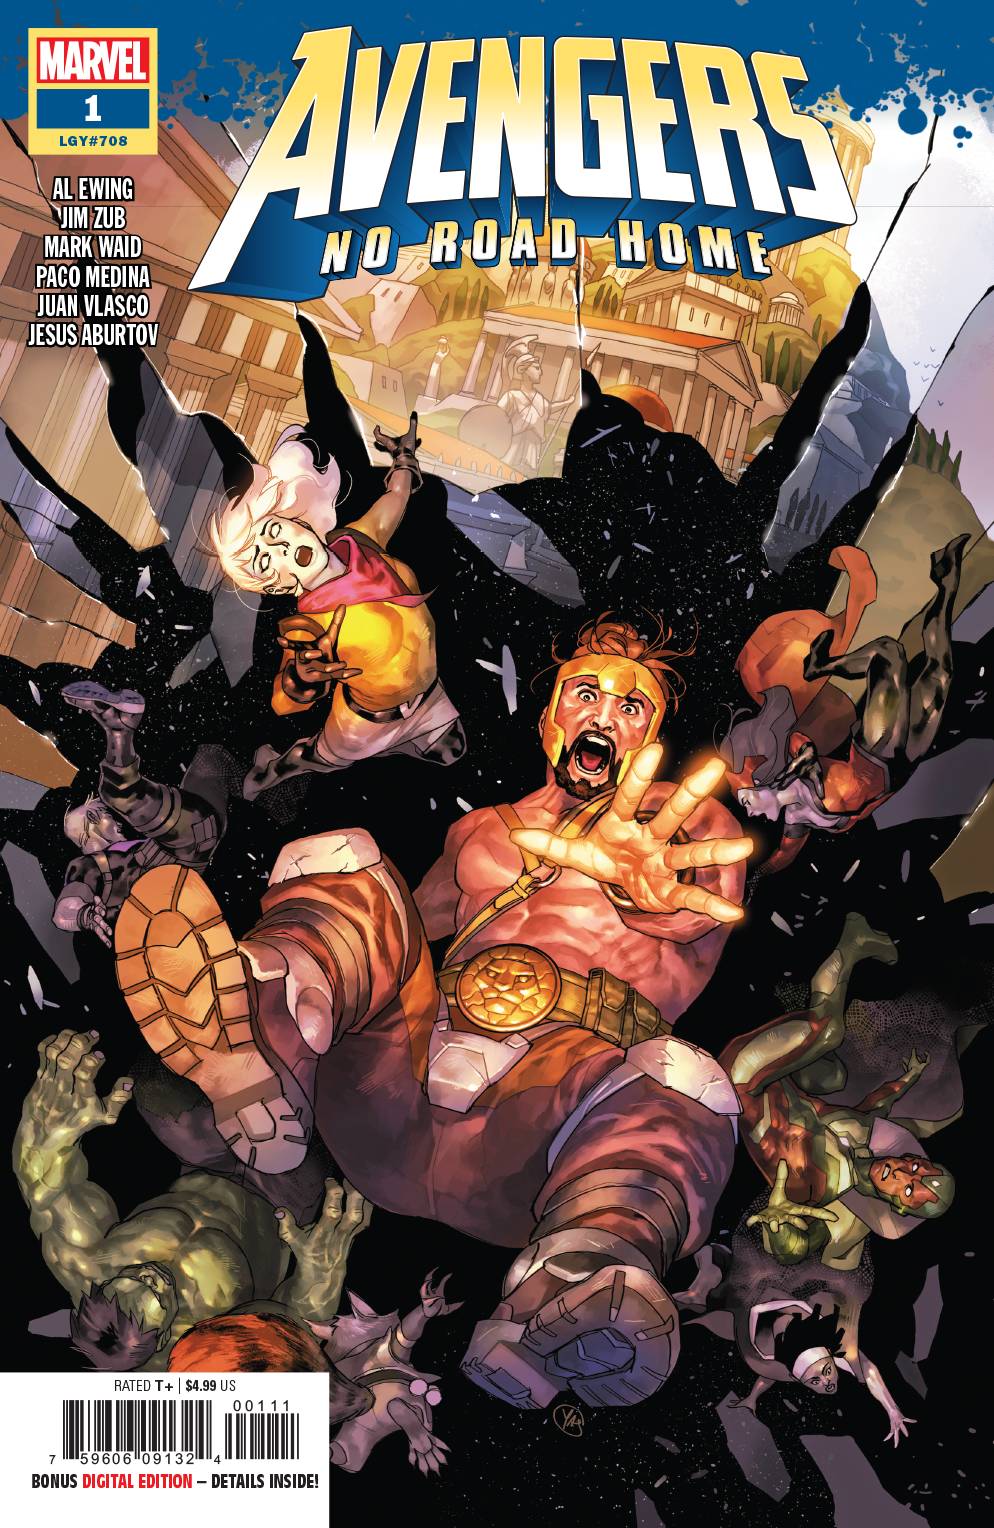 AVENGERS NO ROAD HOME #1 (OF 10) 02/13/19